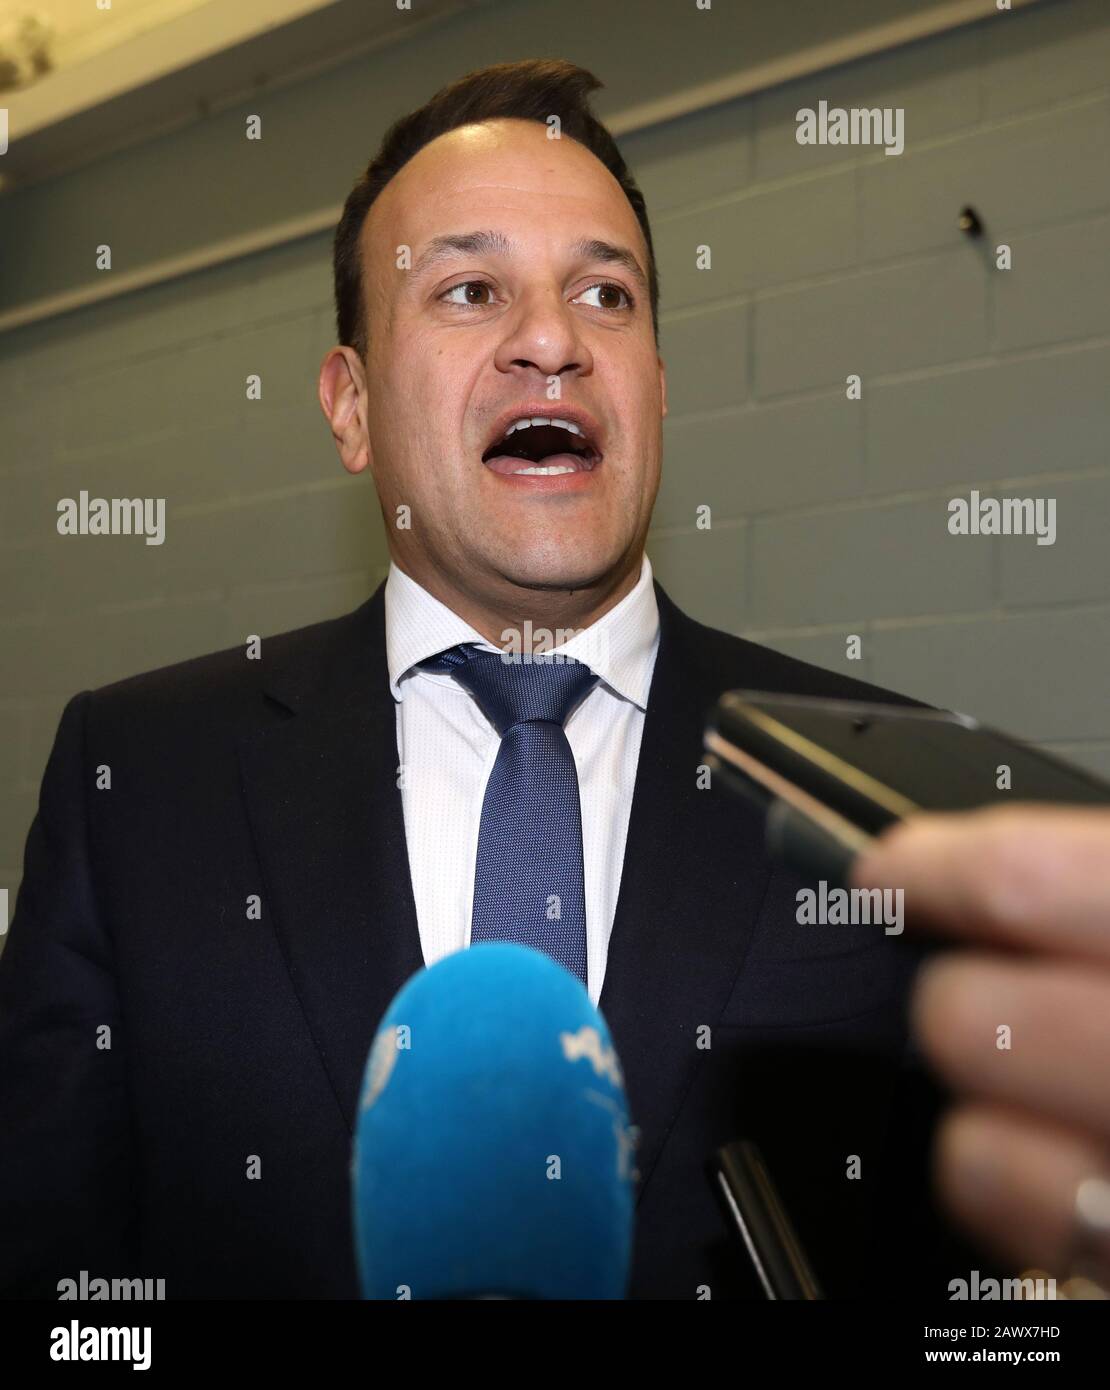 Dublin, Ireland. 9th Feb 2020. General Election Results. Counting of Ballots. Ballot papers in the Phibblestown Community Centre in Dublin West. Taoiseach and Fine Gael leader Leo Varadkar talking to the media at the Count Centre. Photo: Eamonn Farrell/RollingNews.ie Credit: RollingNews.ie/Alamy Live News Stock Photo